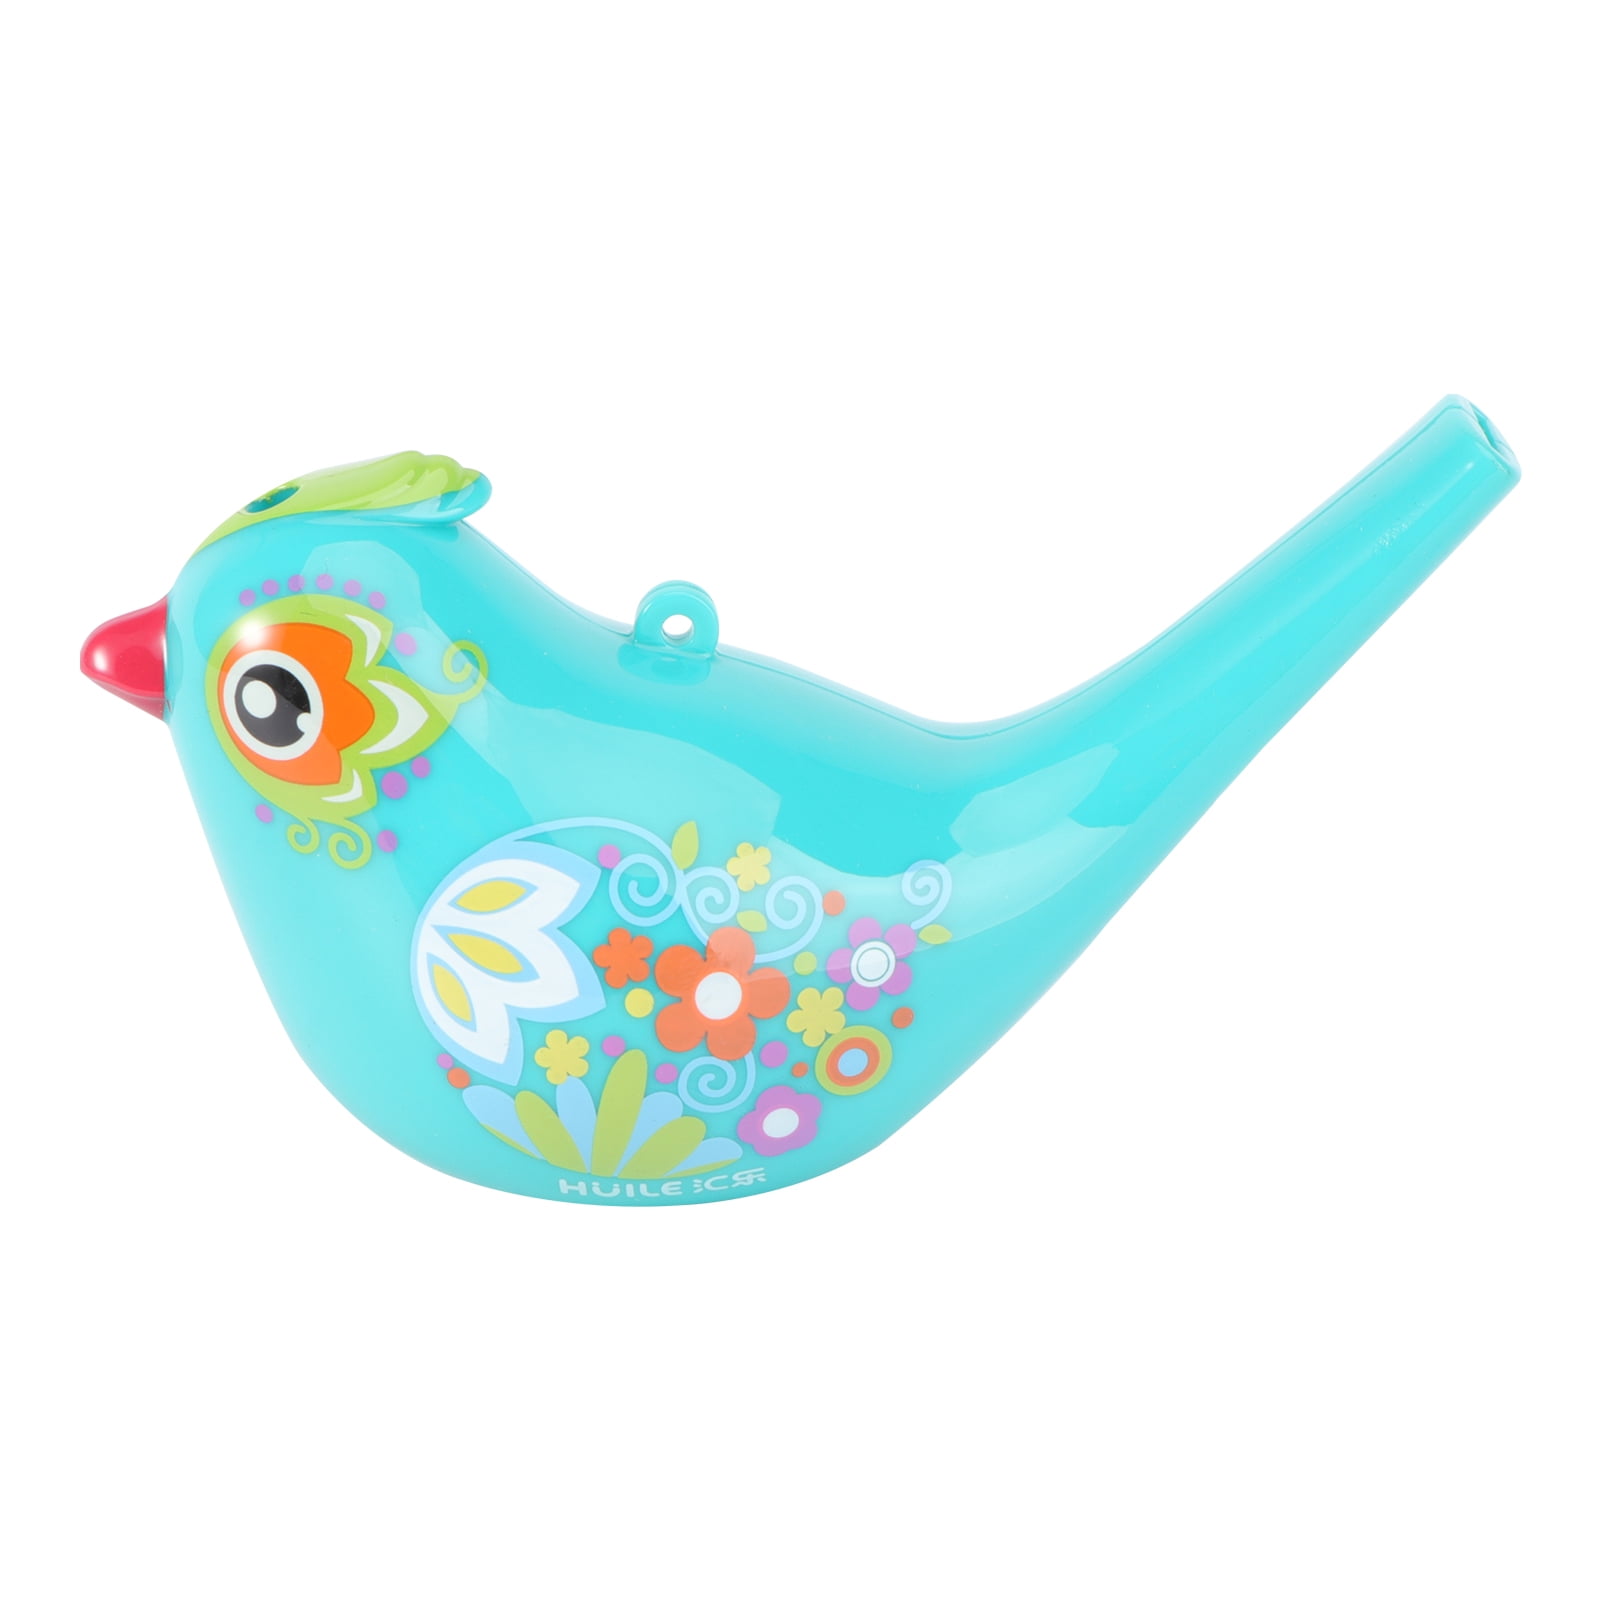 2 Pieces Birthday Gift Bath Bird Whistle for Kids Colorful Bird Water Whistle for Bath Toys Bird Whistle Easter Gift